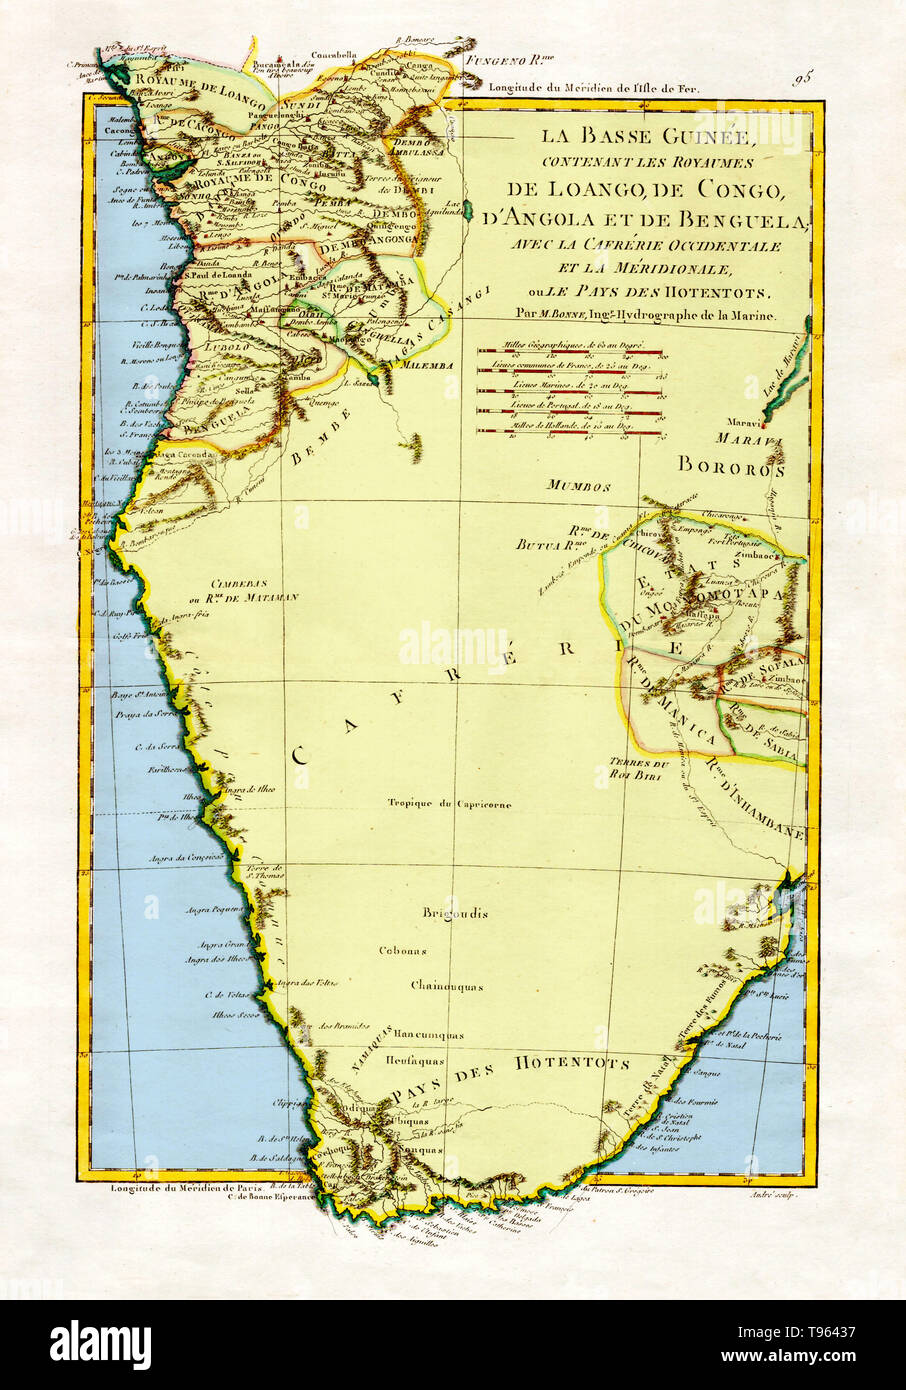 'The Kingdoms of Lower Guinea Including Loango, Congo, Angola, and Benguela with Kaffraria and the West Country of Meridionale or Hotentots,' 1788. A general map of Angola and the Congo, showing some relief information. Created by M. Bonne, Ingenieur-Hydrographe de la Marine. This image has been color enhanced. Stock Photo